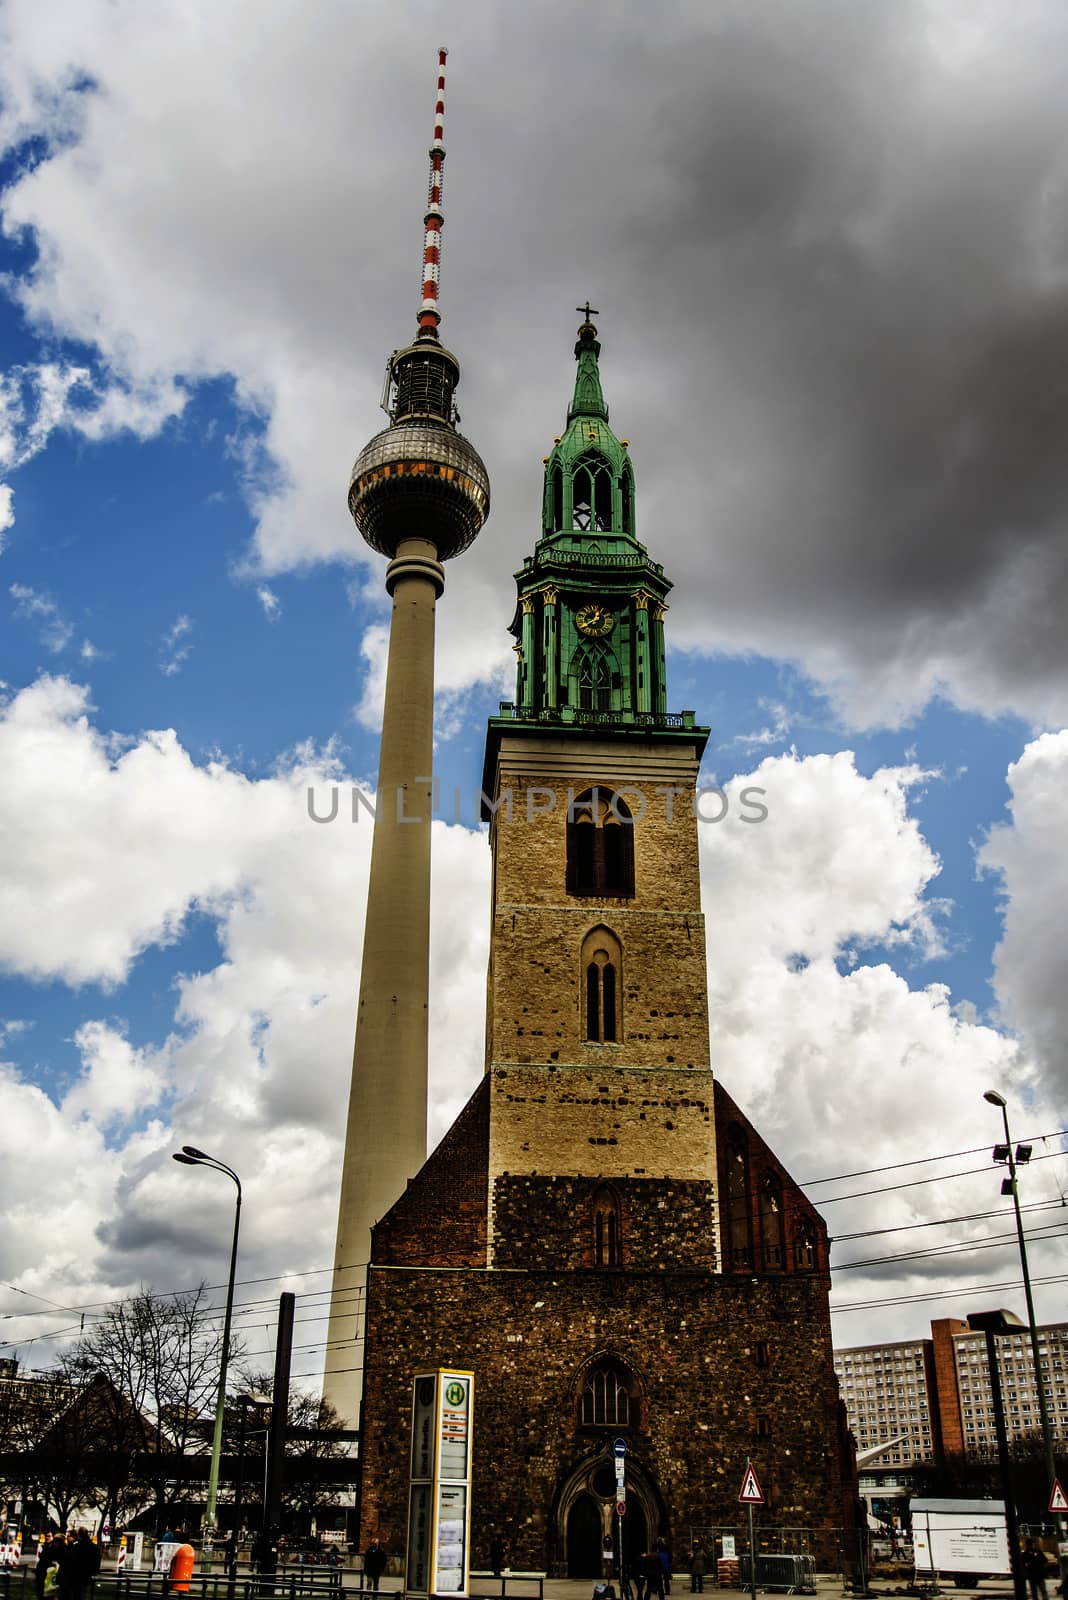 BERLIN - APRIL 4: the church of St. Mary's church and the Tv tower behind on April 4, 2015 in Berlin, Germany